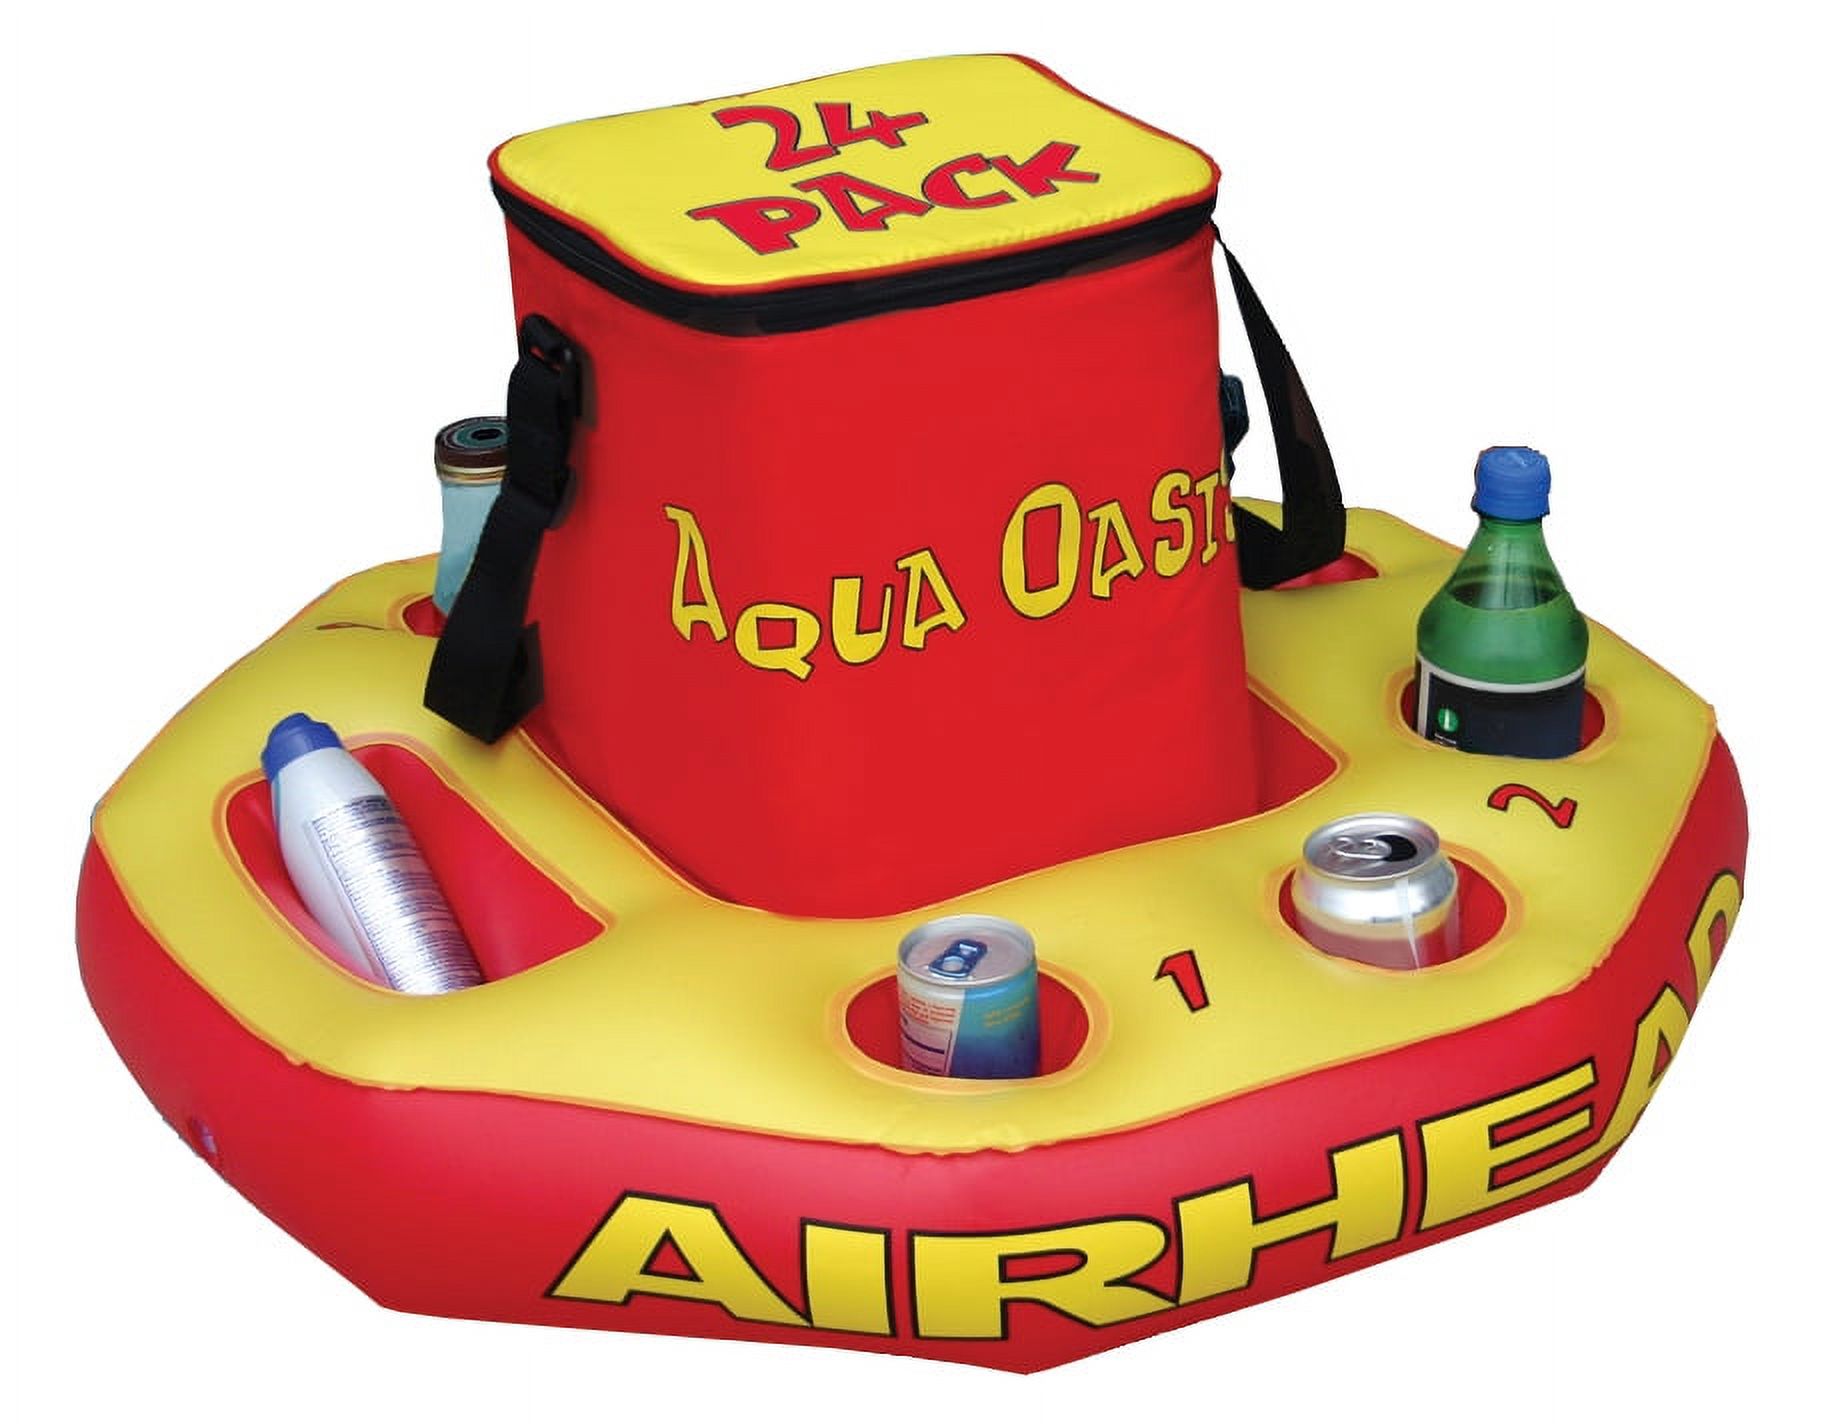 Aqua Oasis Insulated Cooler with Removable Floating Base - image 1 of 5